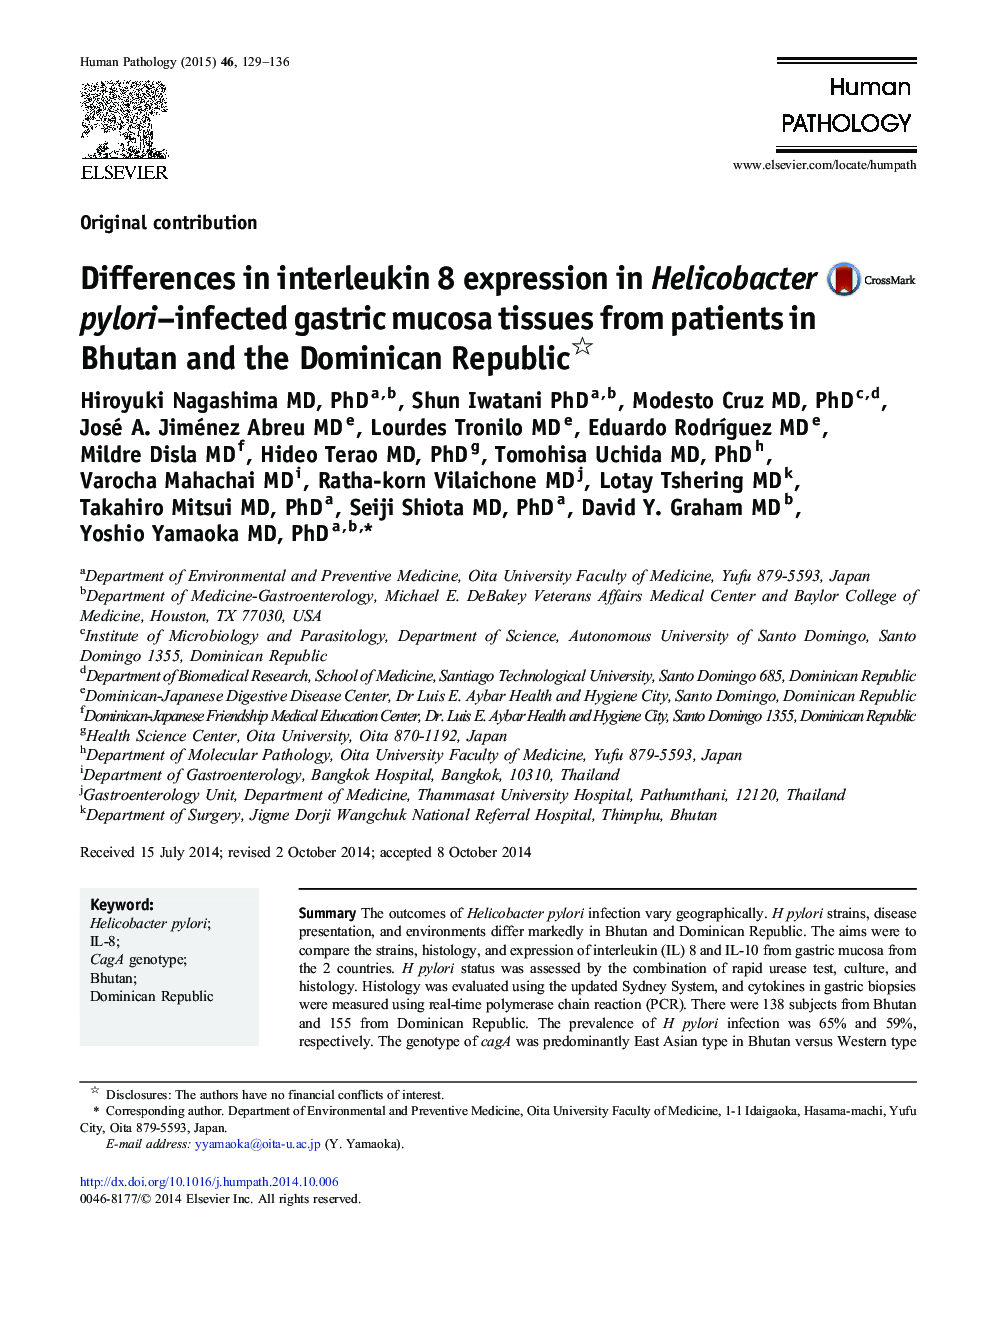 Differences in interleukin 8 expression in Helicobacter pylori-infected gastric mucosa tissues from patients in Bhutan and the Dominican Republic